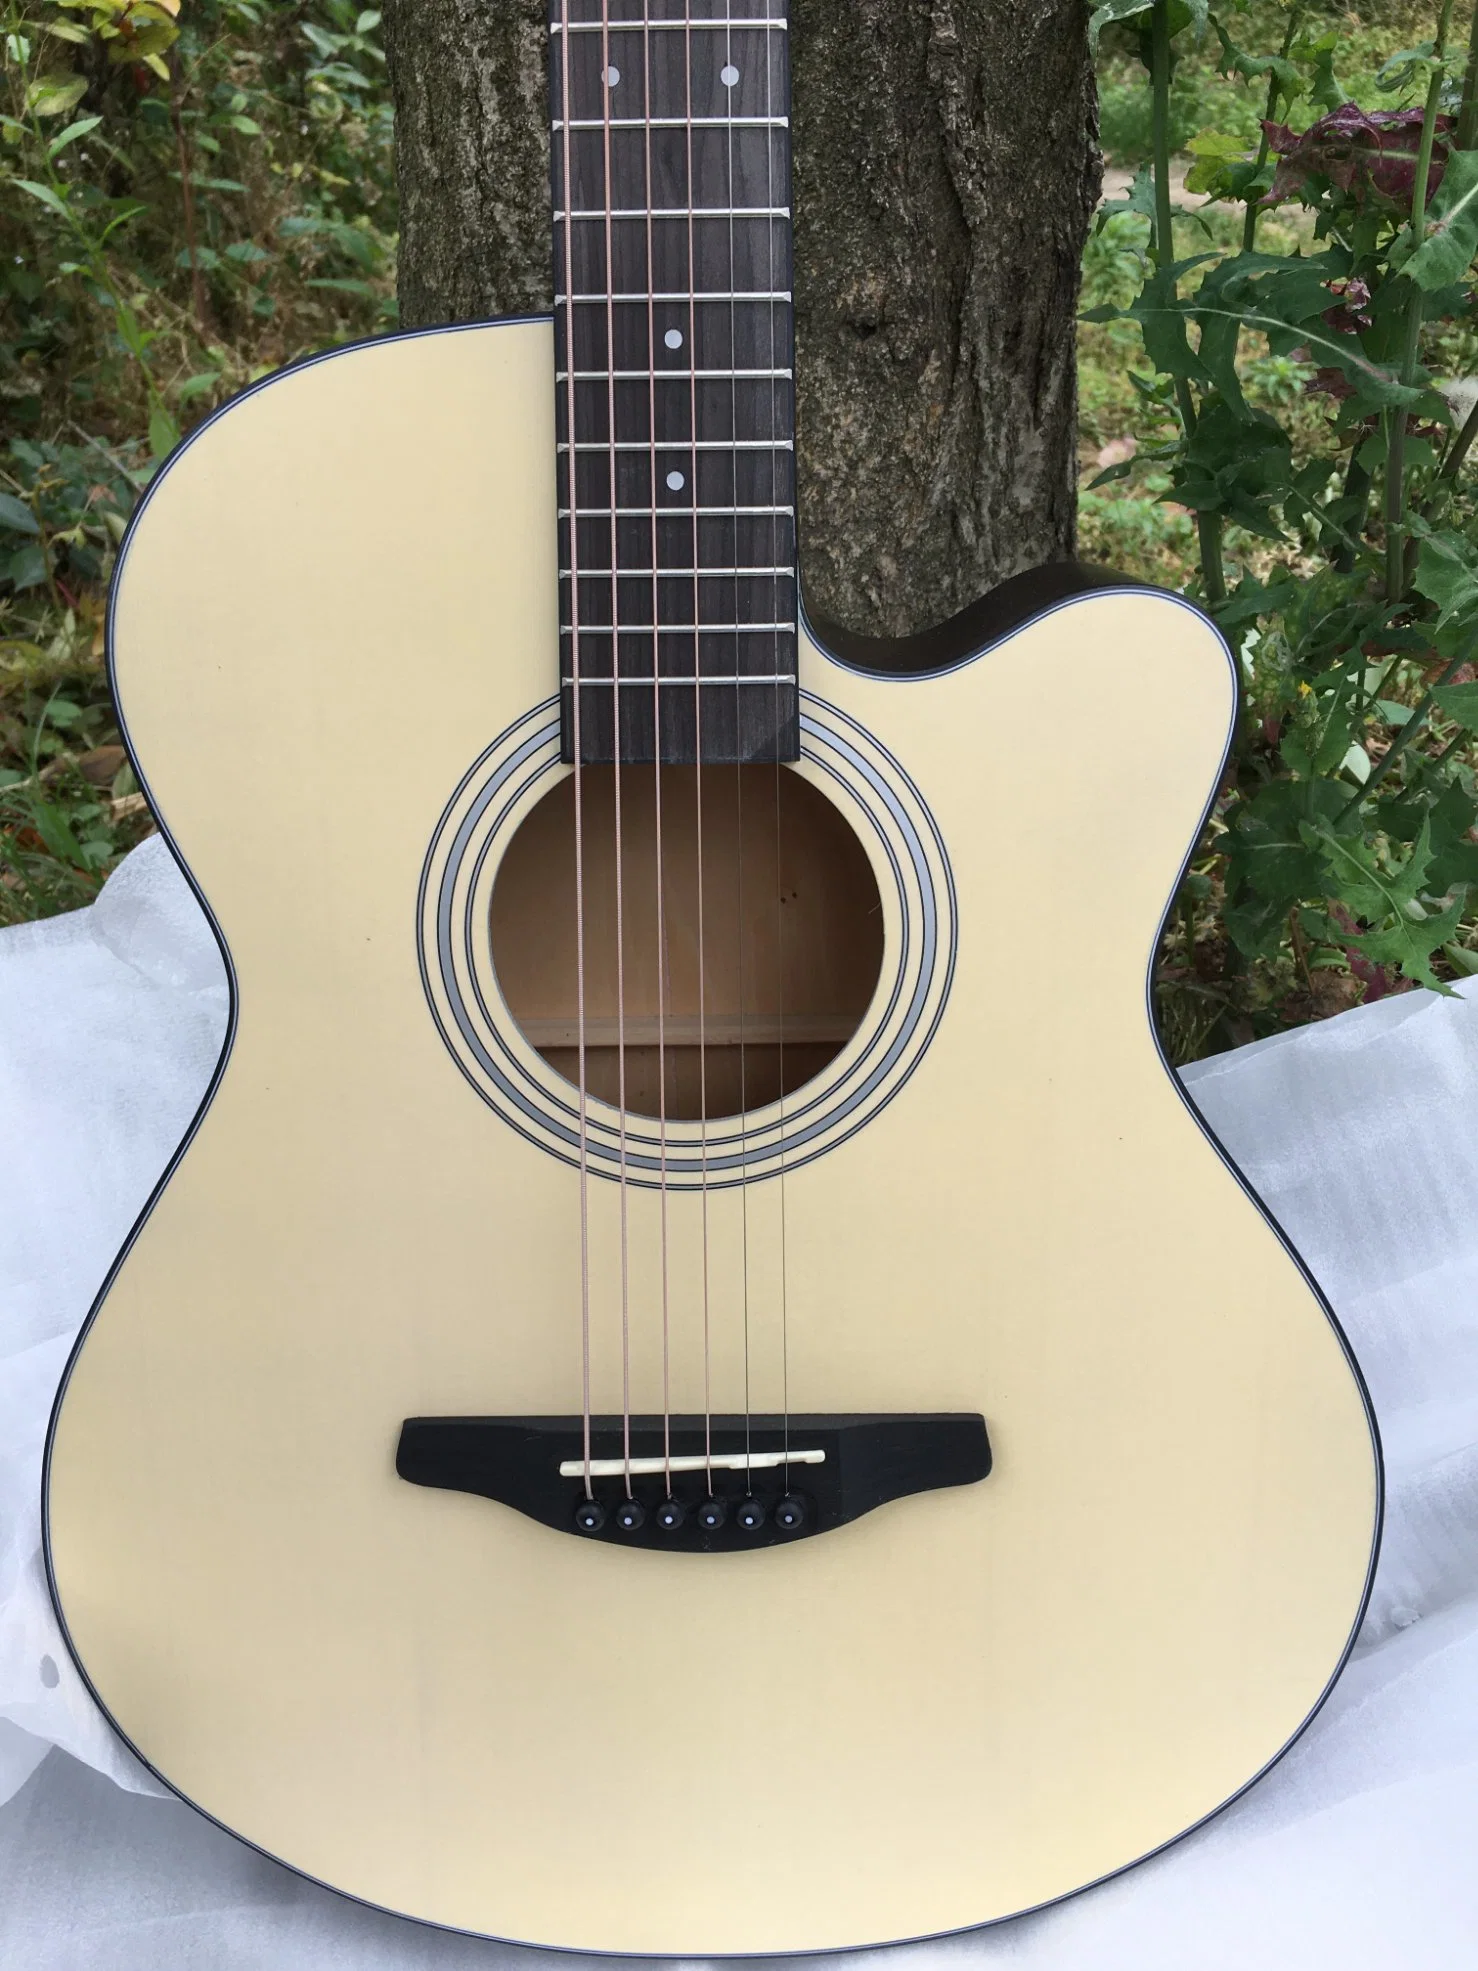 China Factory 41 Inch Acoustic Guitar Wholesale Musical Instrument for Sale 6 String Guitars Cheap Guitars